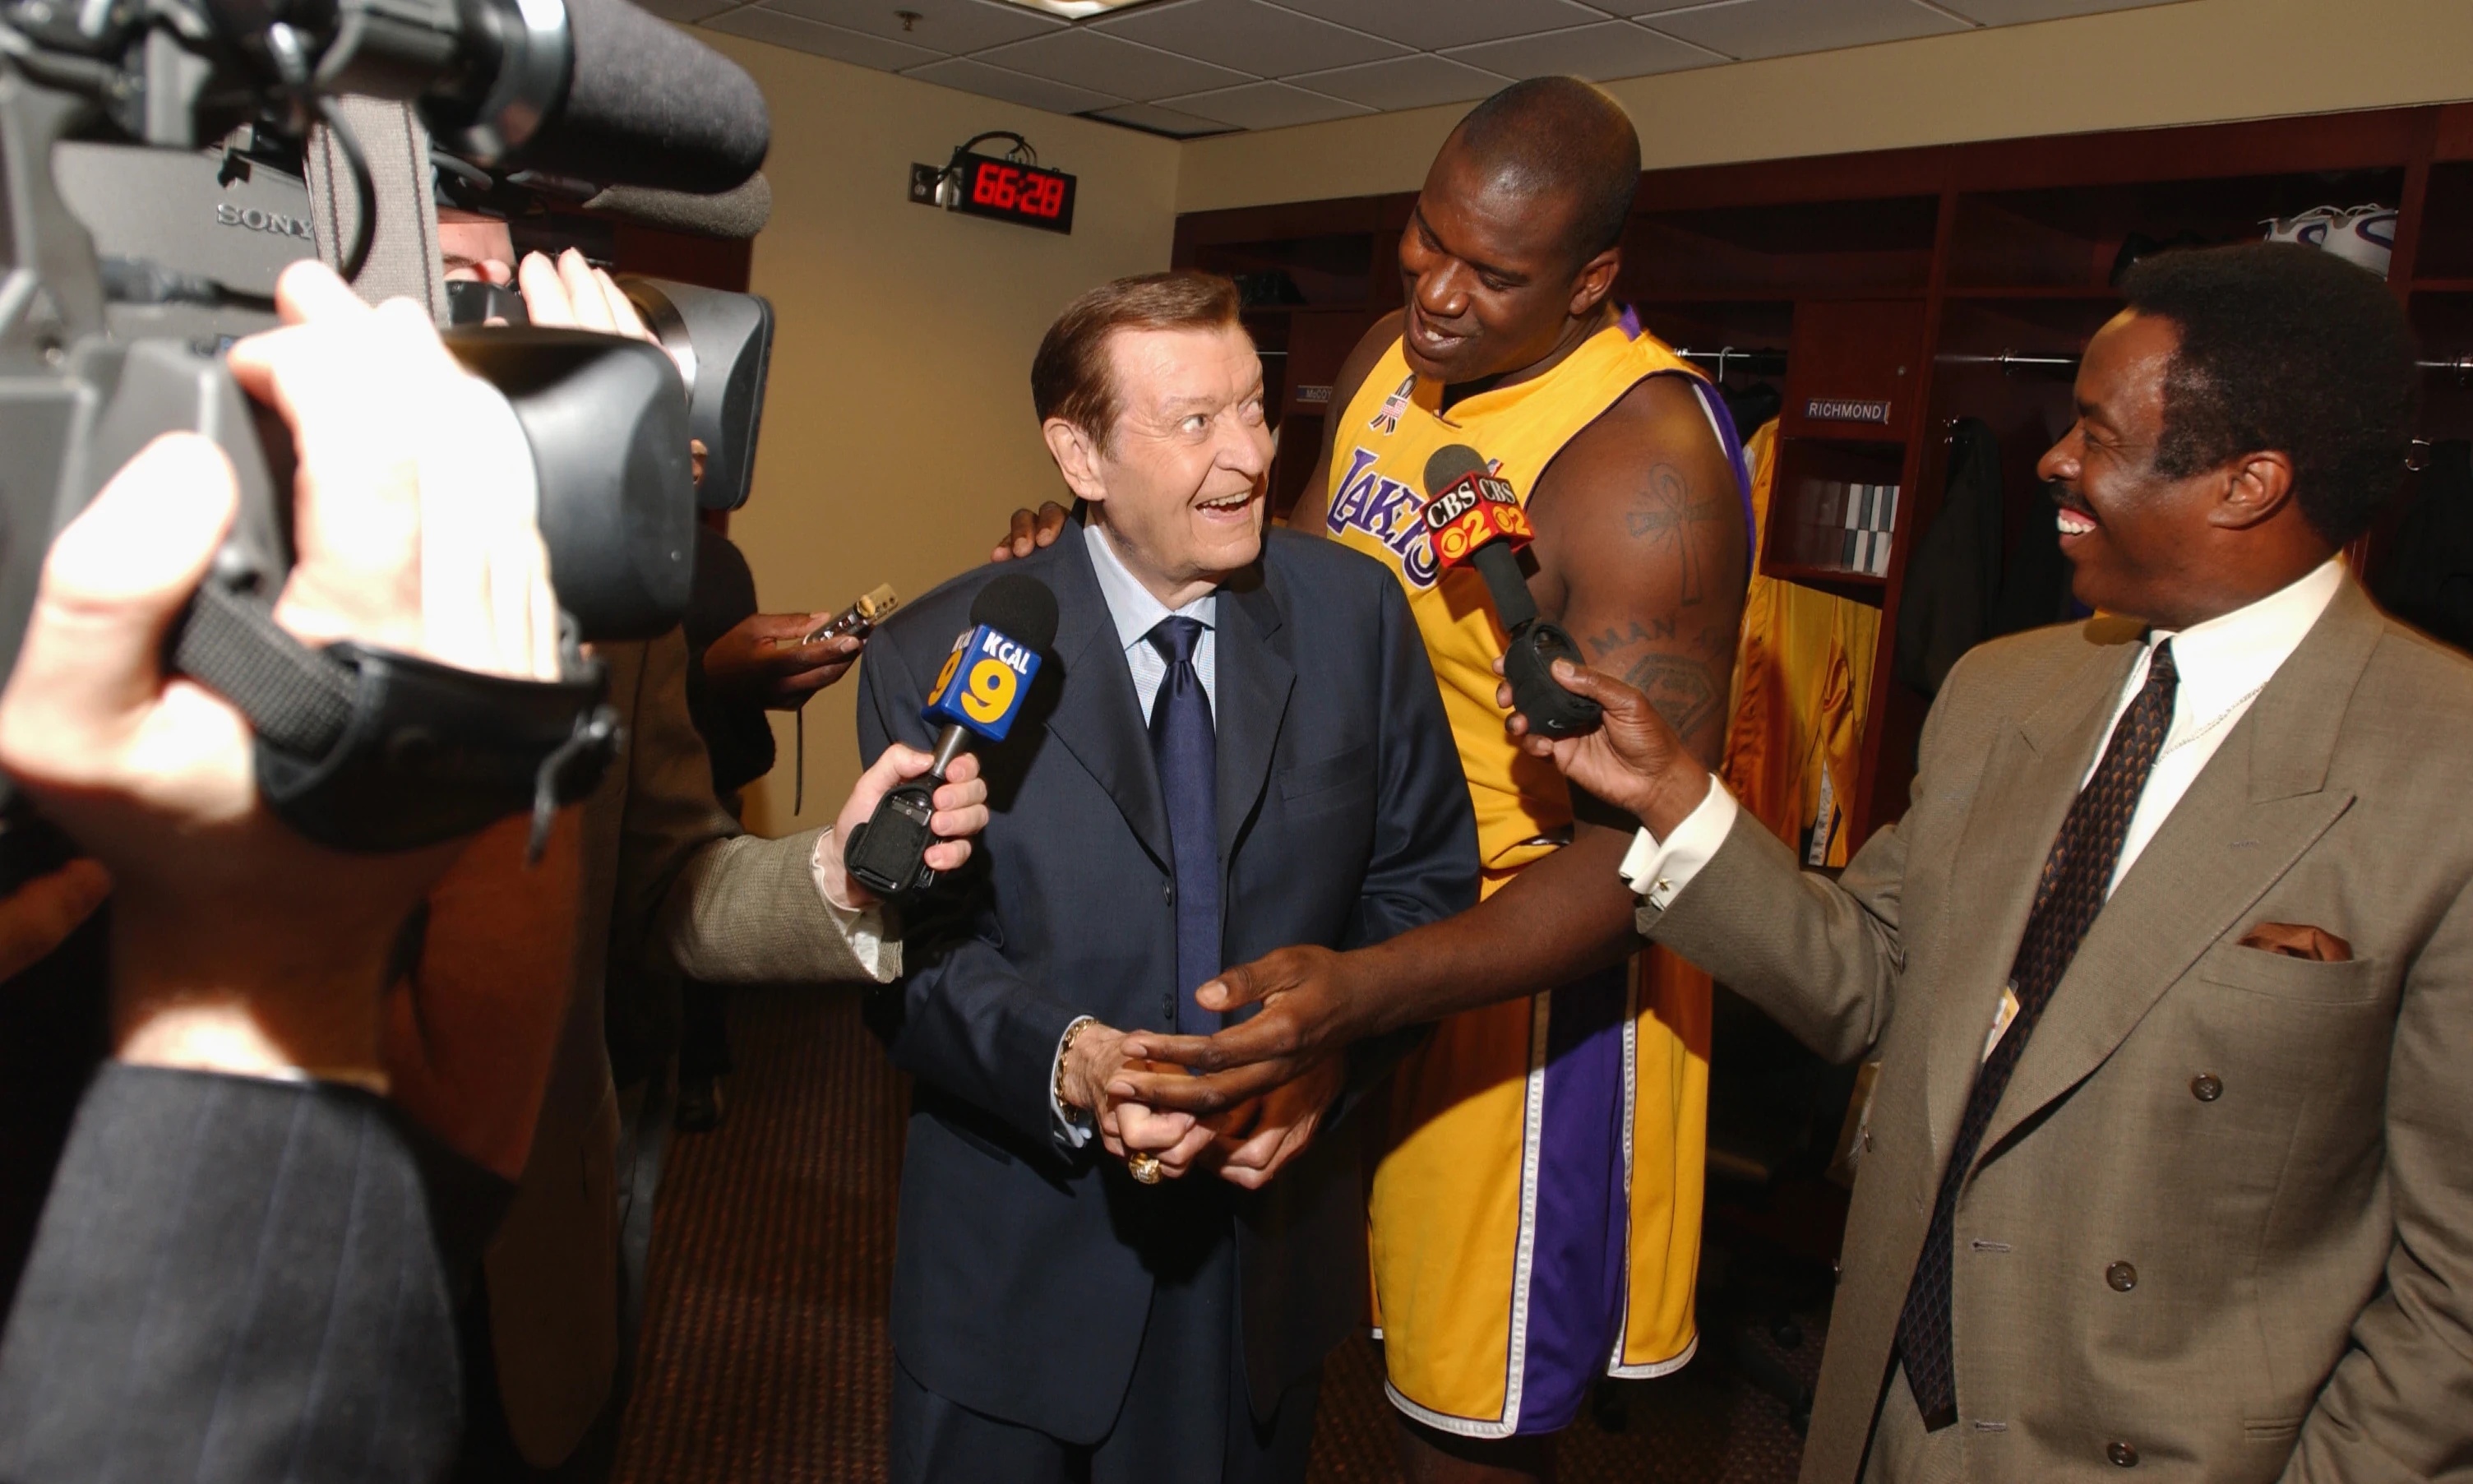 Chick Hearn and Shaq